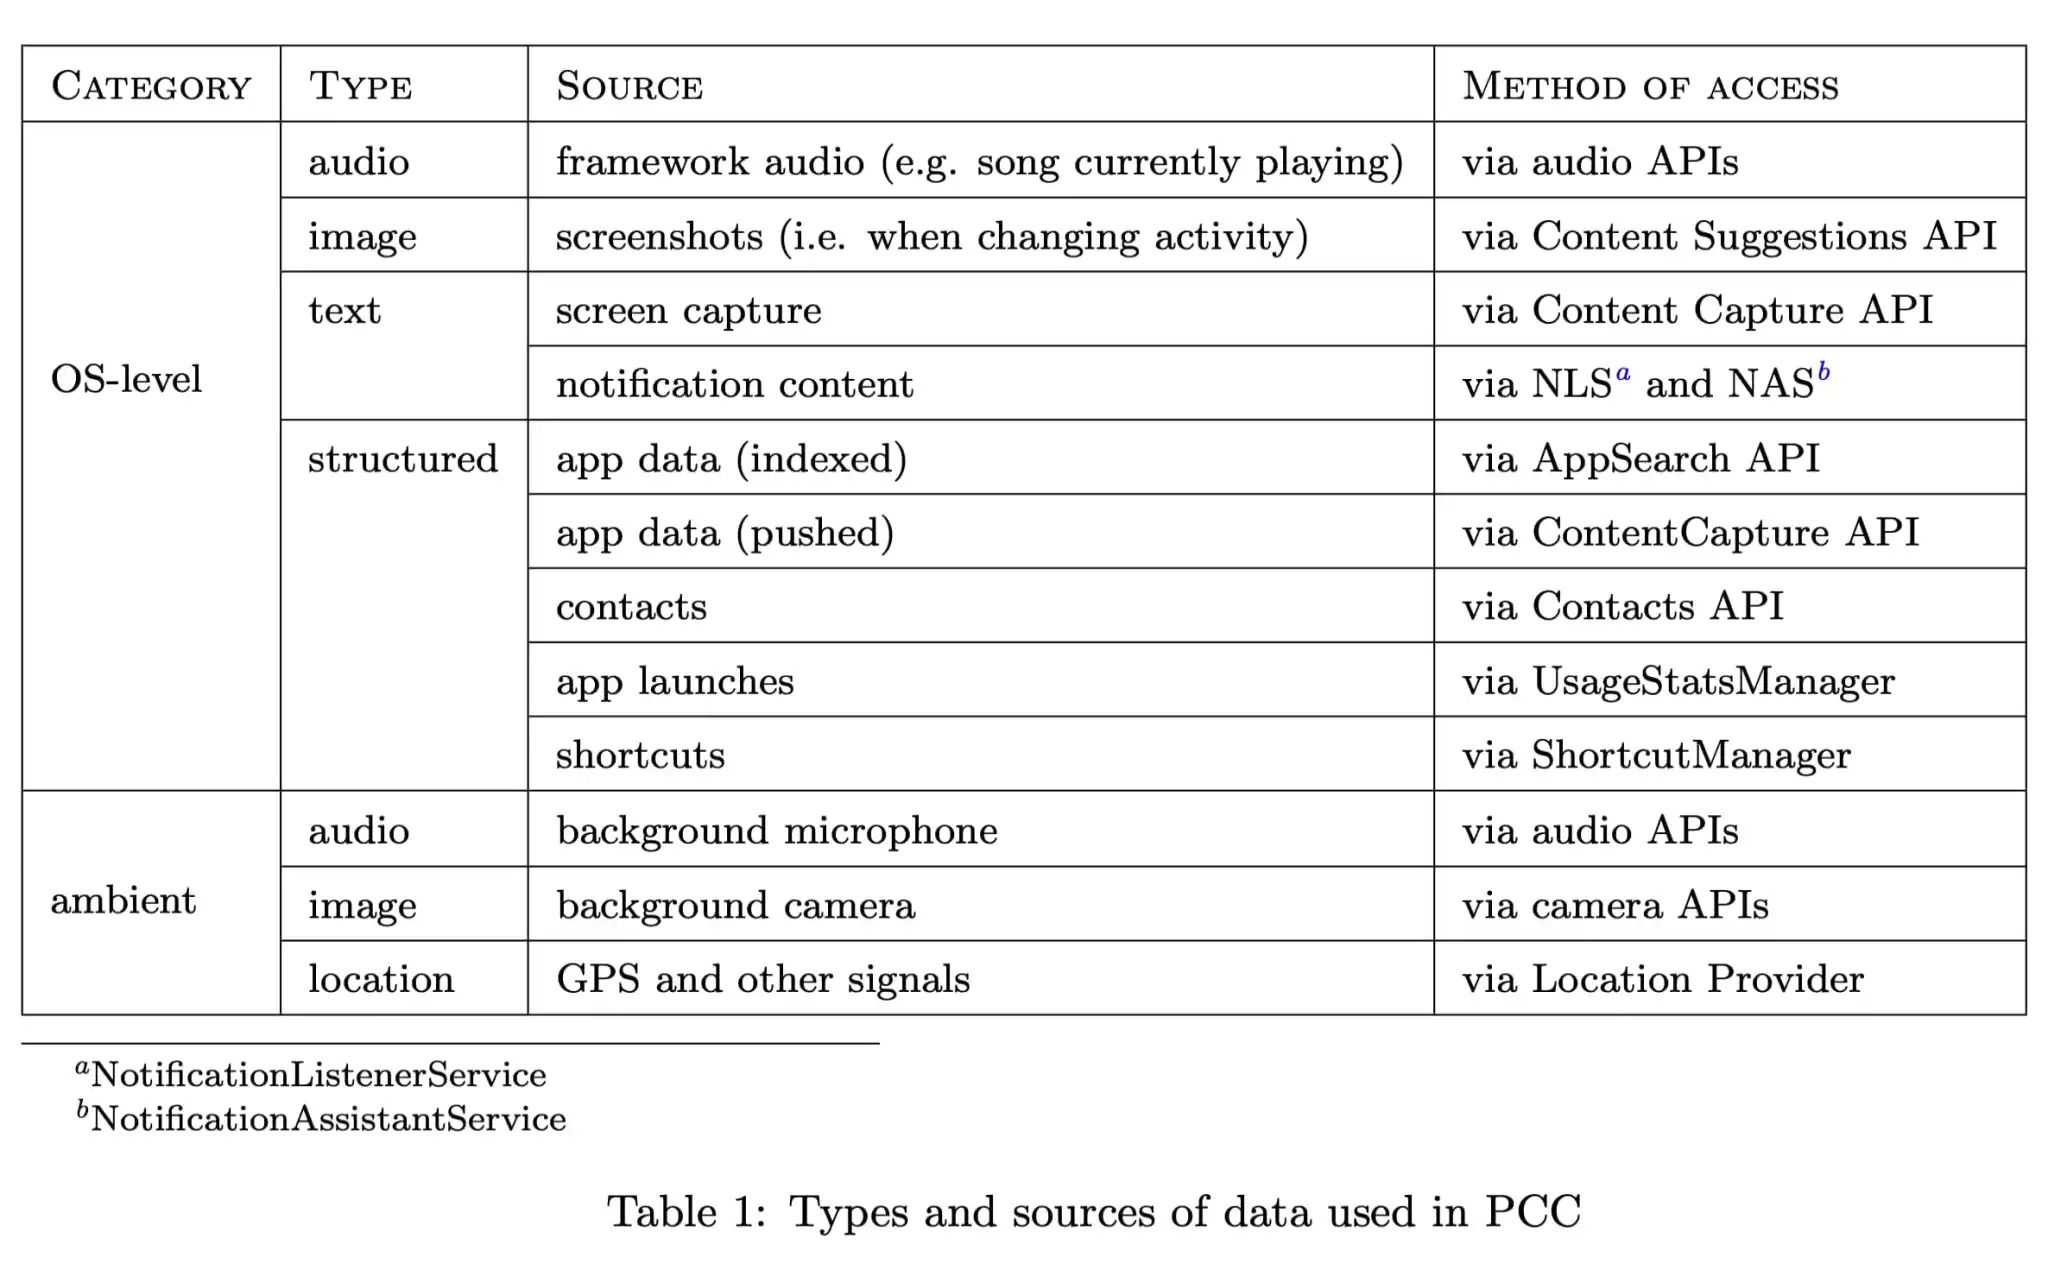 A table of types and sources of data used in PCC